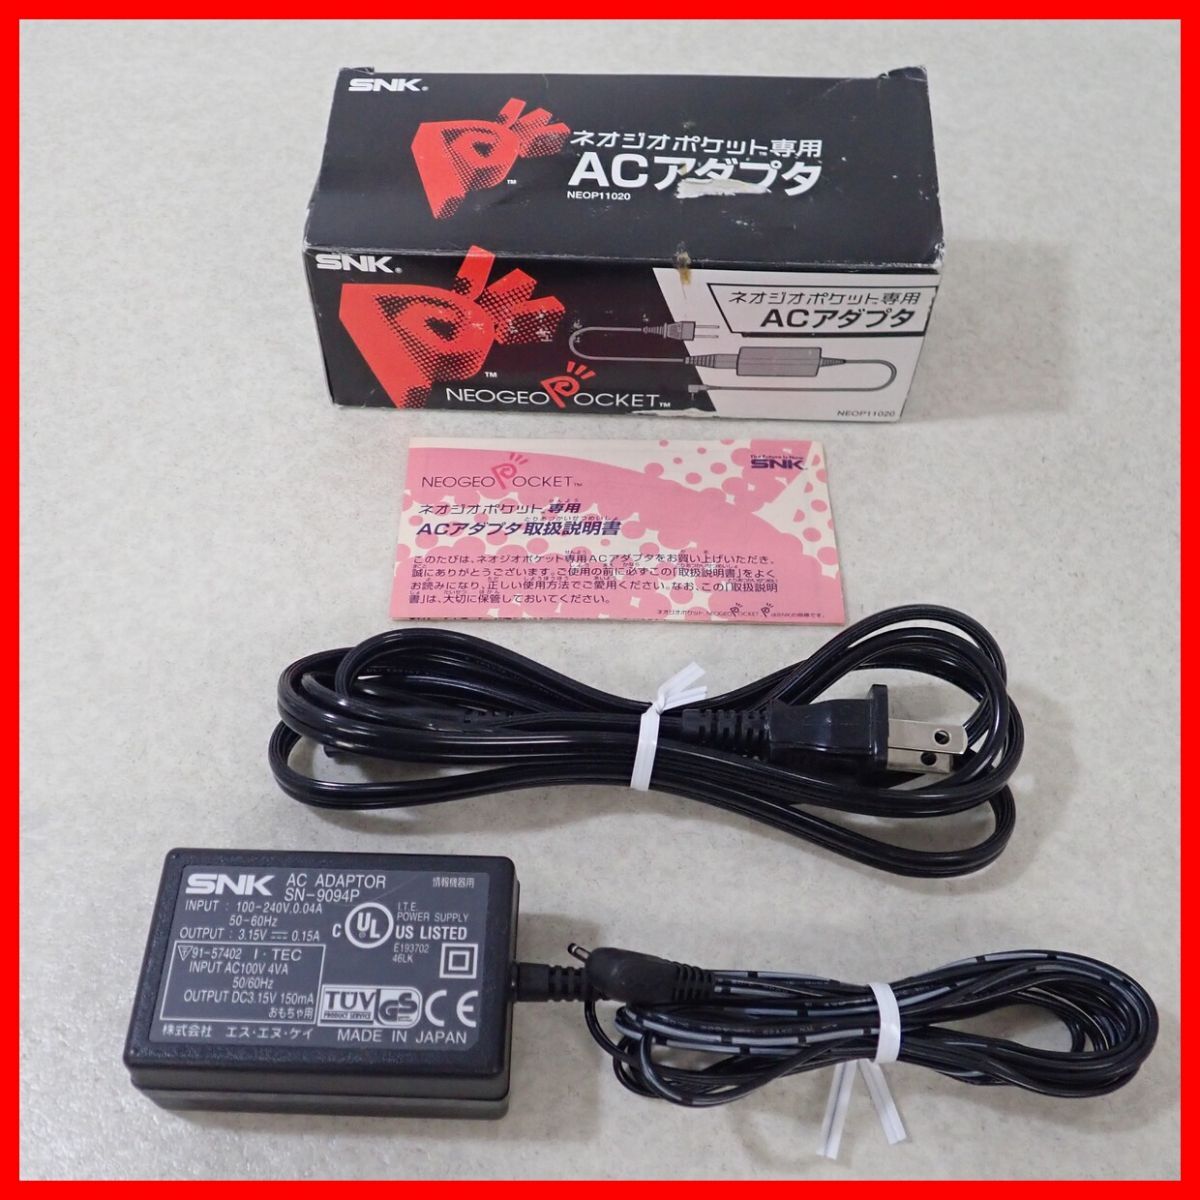 * operation goods NGP Neo geo pocket exclusive use AC adapter NEOP11020 SNK box opinion attaching NEOGEO POCKET[10